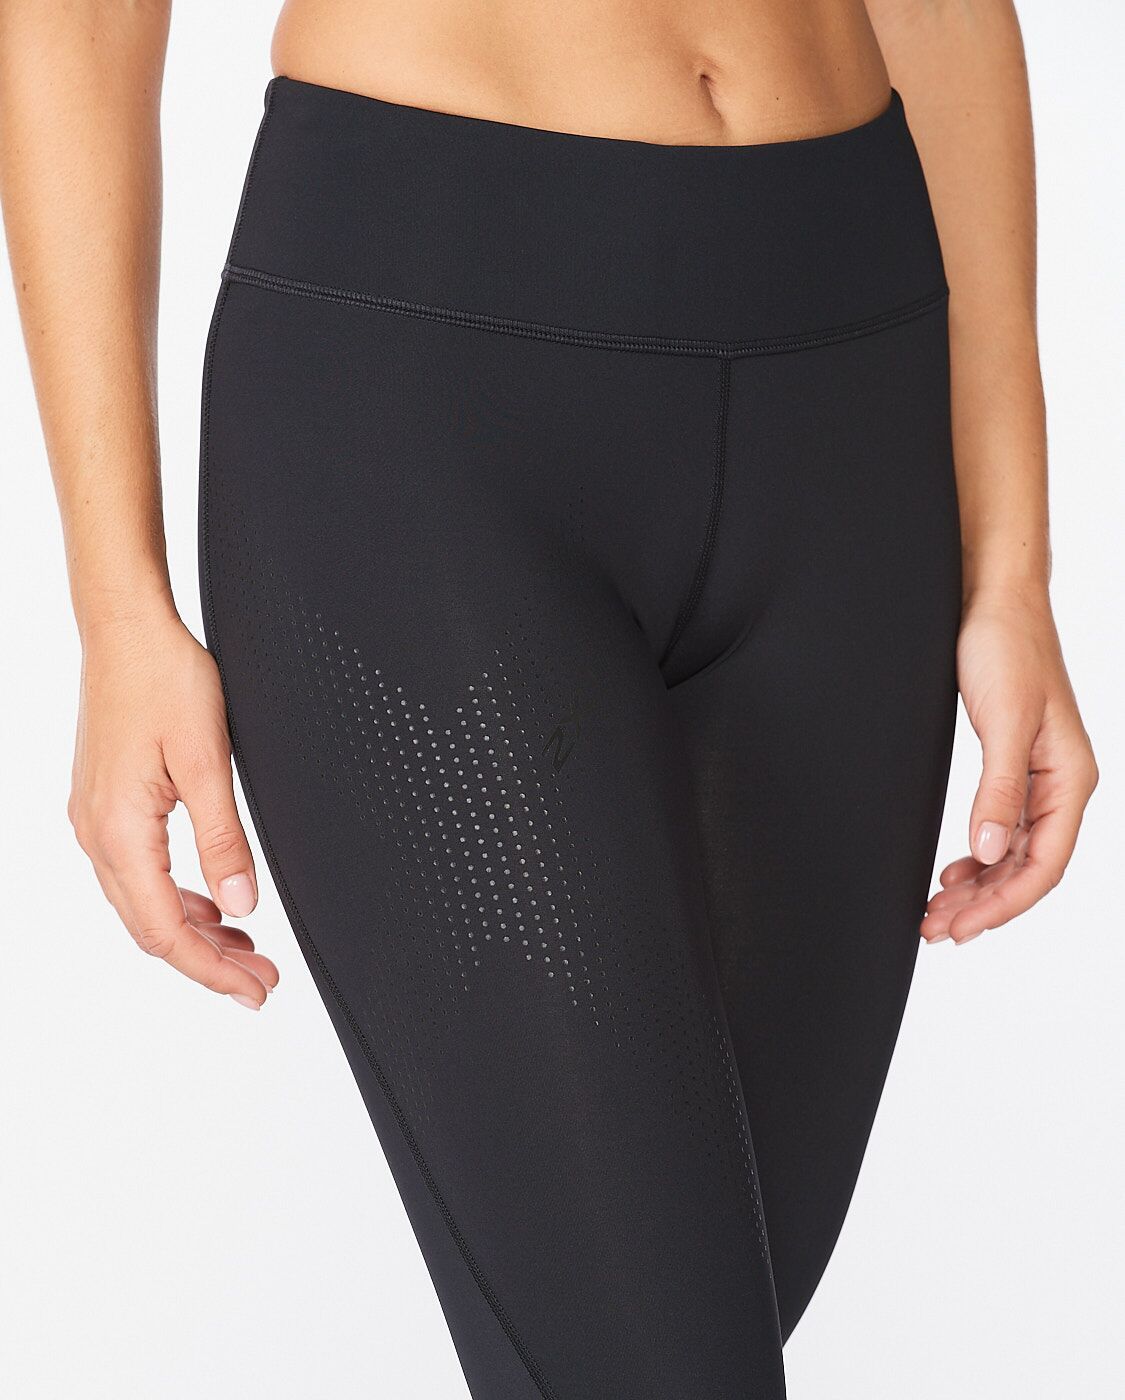 2XU South Africa - Women's Motion Mid-Rise Compression Tights - Black/Dotted Black Logo